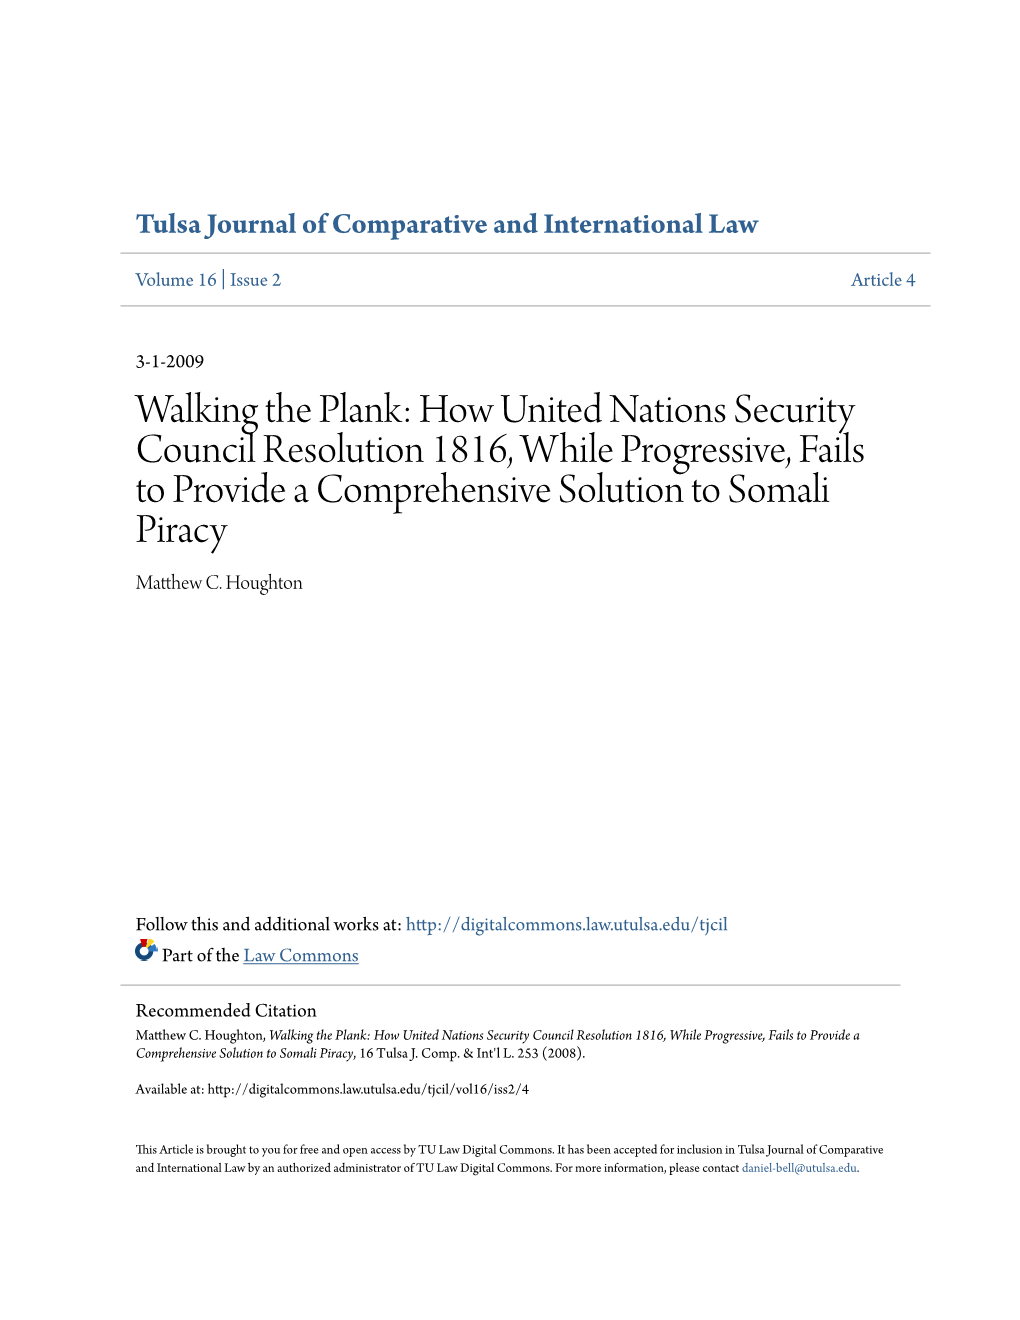 How United Nations Security Council Resolution 1816, While Progressive, Fails to Provide a Comprehensive Solution to Somali Piracy Matthew .C Houghton